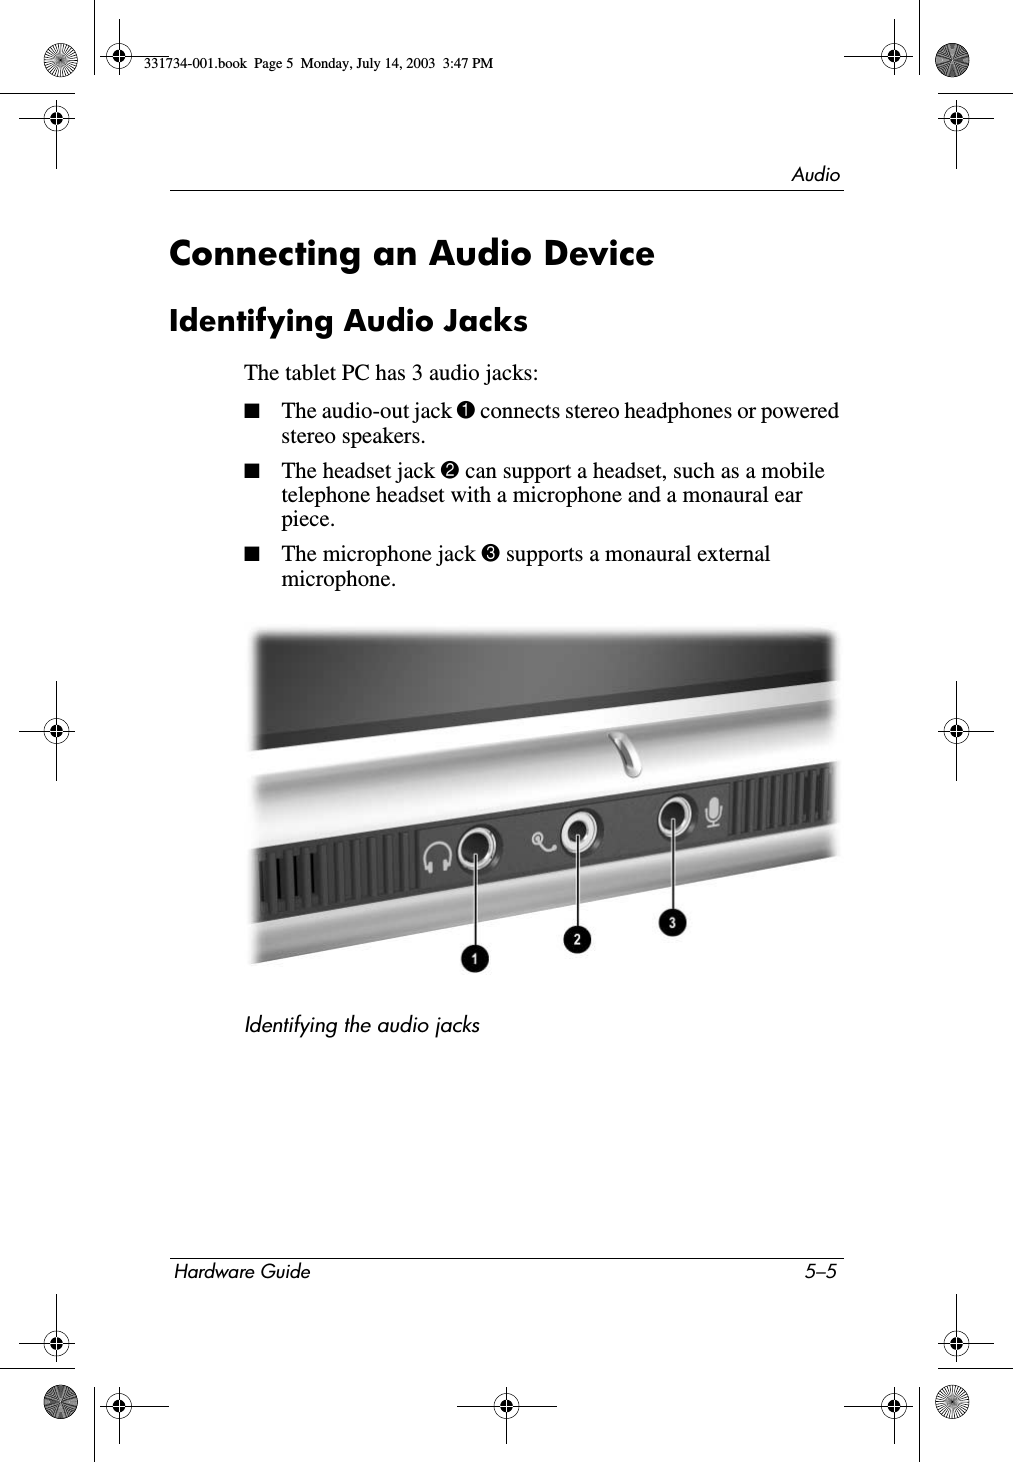 AudioHardware Guide 5–5Connecting an Audio DeviceIdentifying Audio JacksThe tablet PC has 3 audio jacks:■The audio-out jack 1 connects stereo headphones or powered stereo speakers.■The headset jack 2 can support a headset, such as a mobile telephone headset with a microphone and a monaural ear piece.■The microphone jack 3 supports a monaural external microphone.Identifying the audio jacks331734-001.book  Page 5  Monday, July 14, 2003  3:47 PM